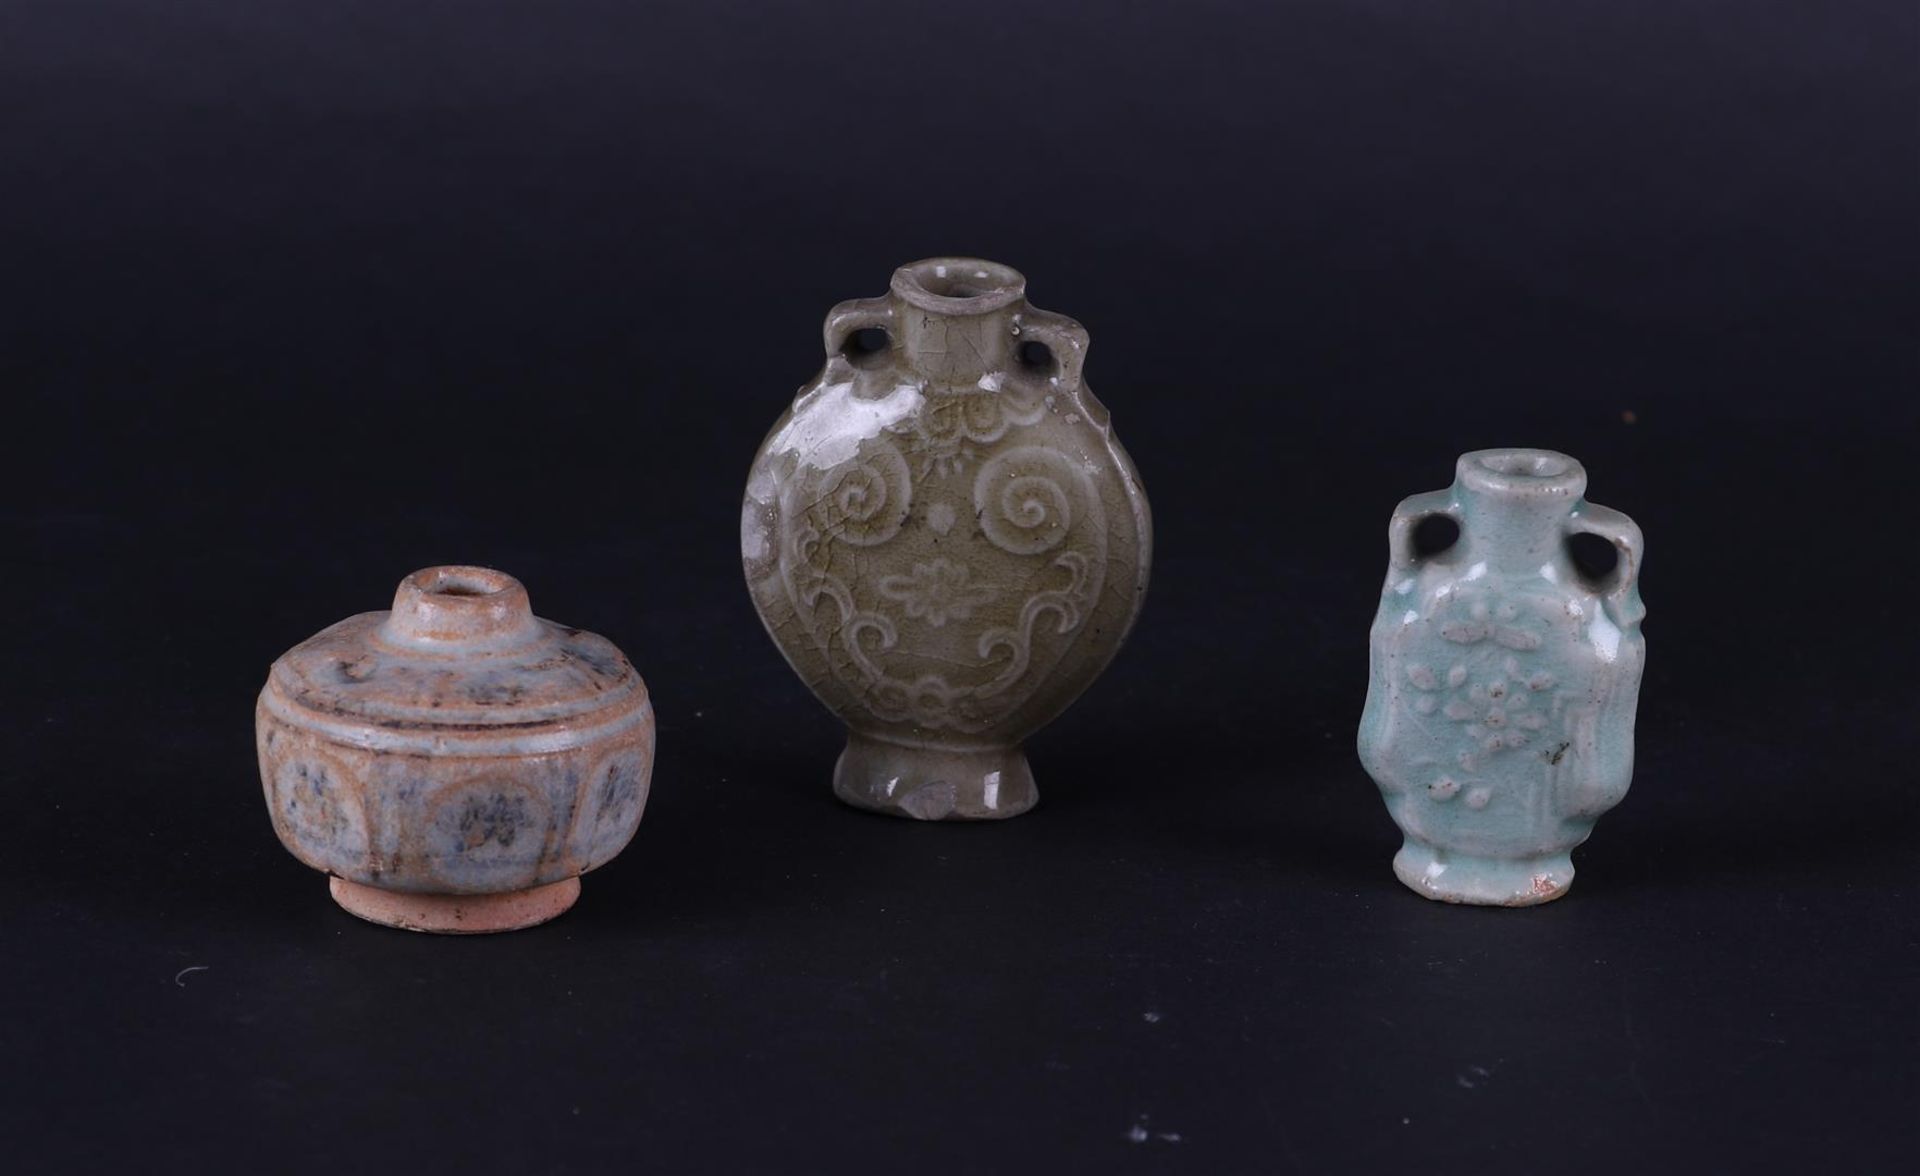 Two small Celadon vases with relief decoration and loop-shaped ears, a burial jar China, Ming